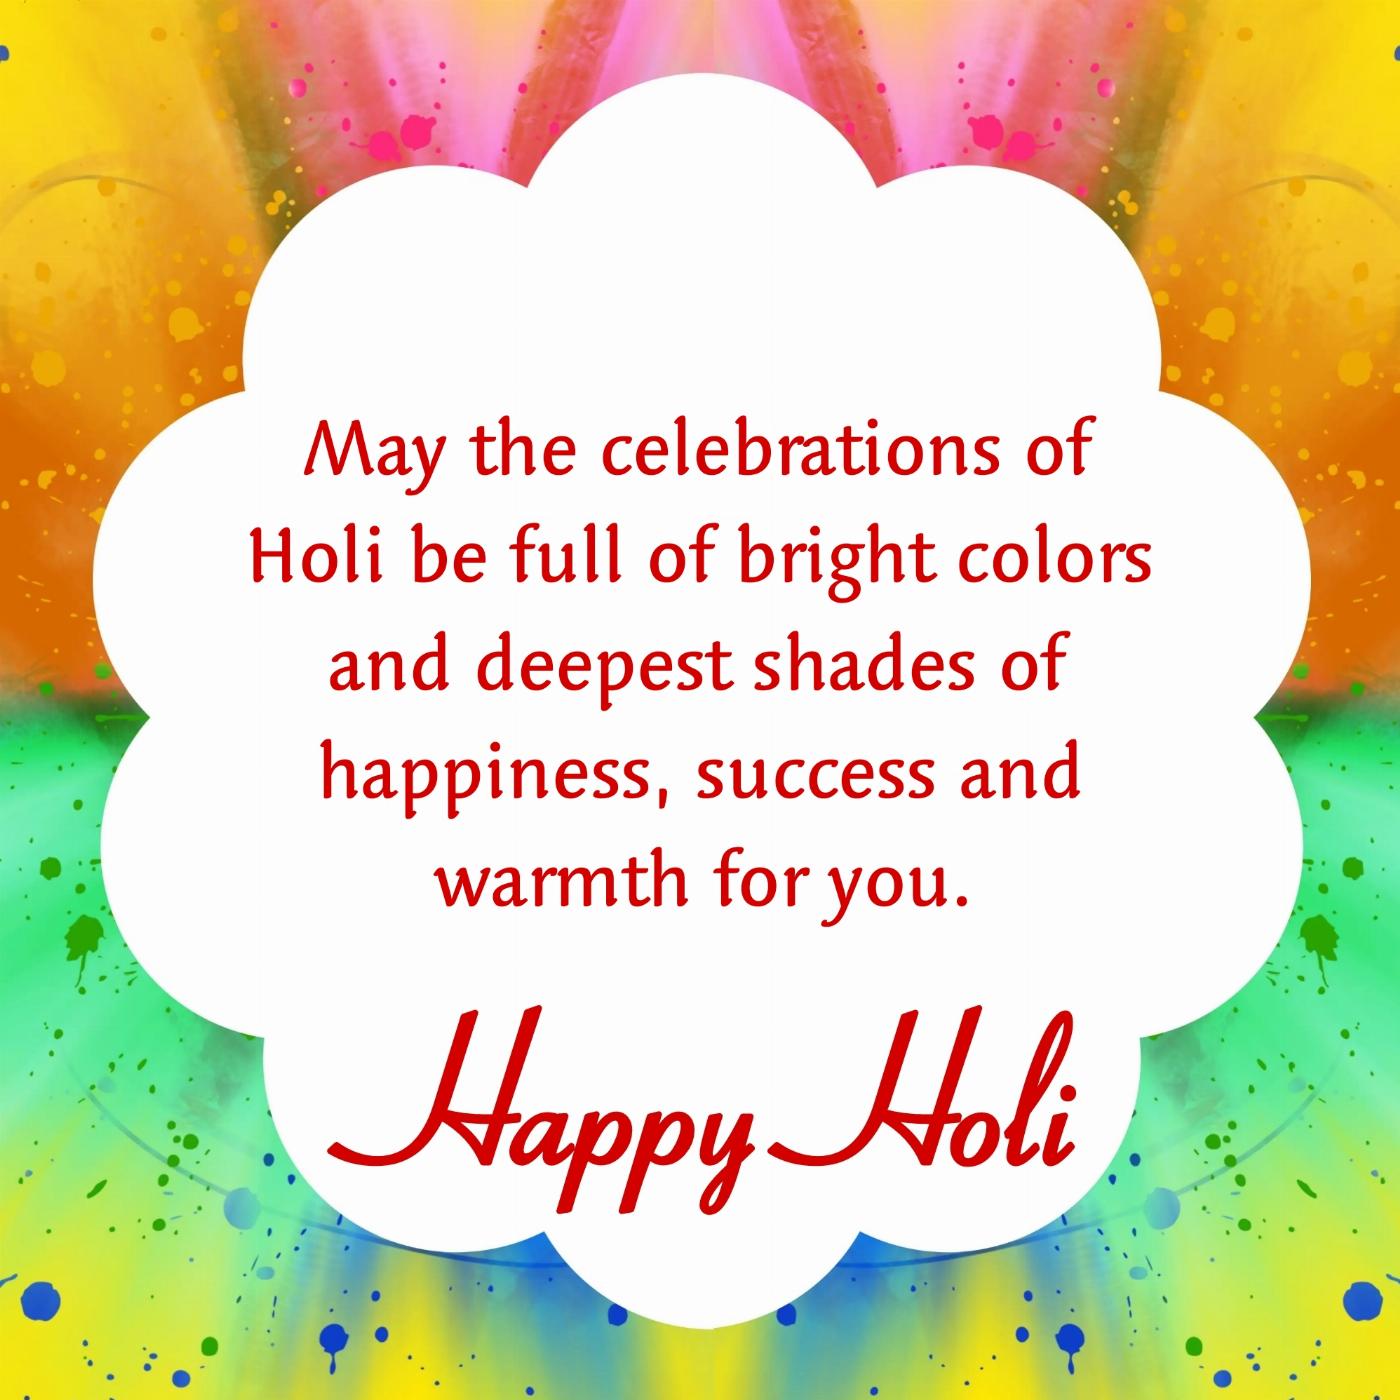 May the celebrations of Holi be full of bright colors and deepest shades of happiness